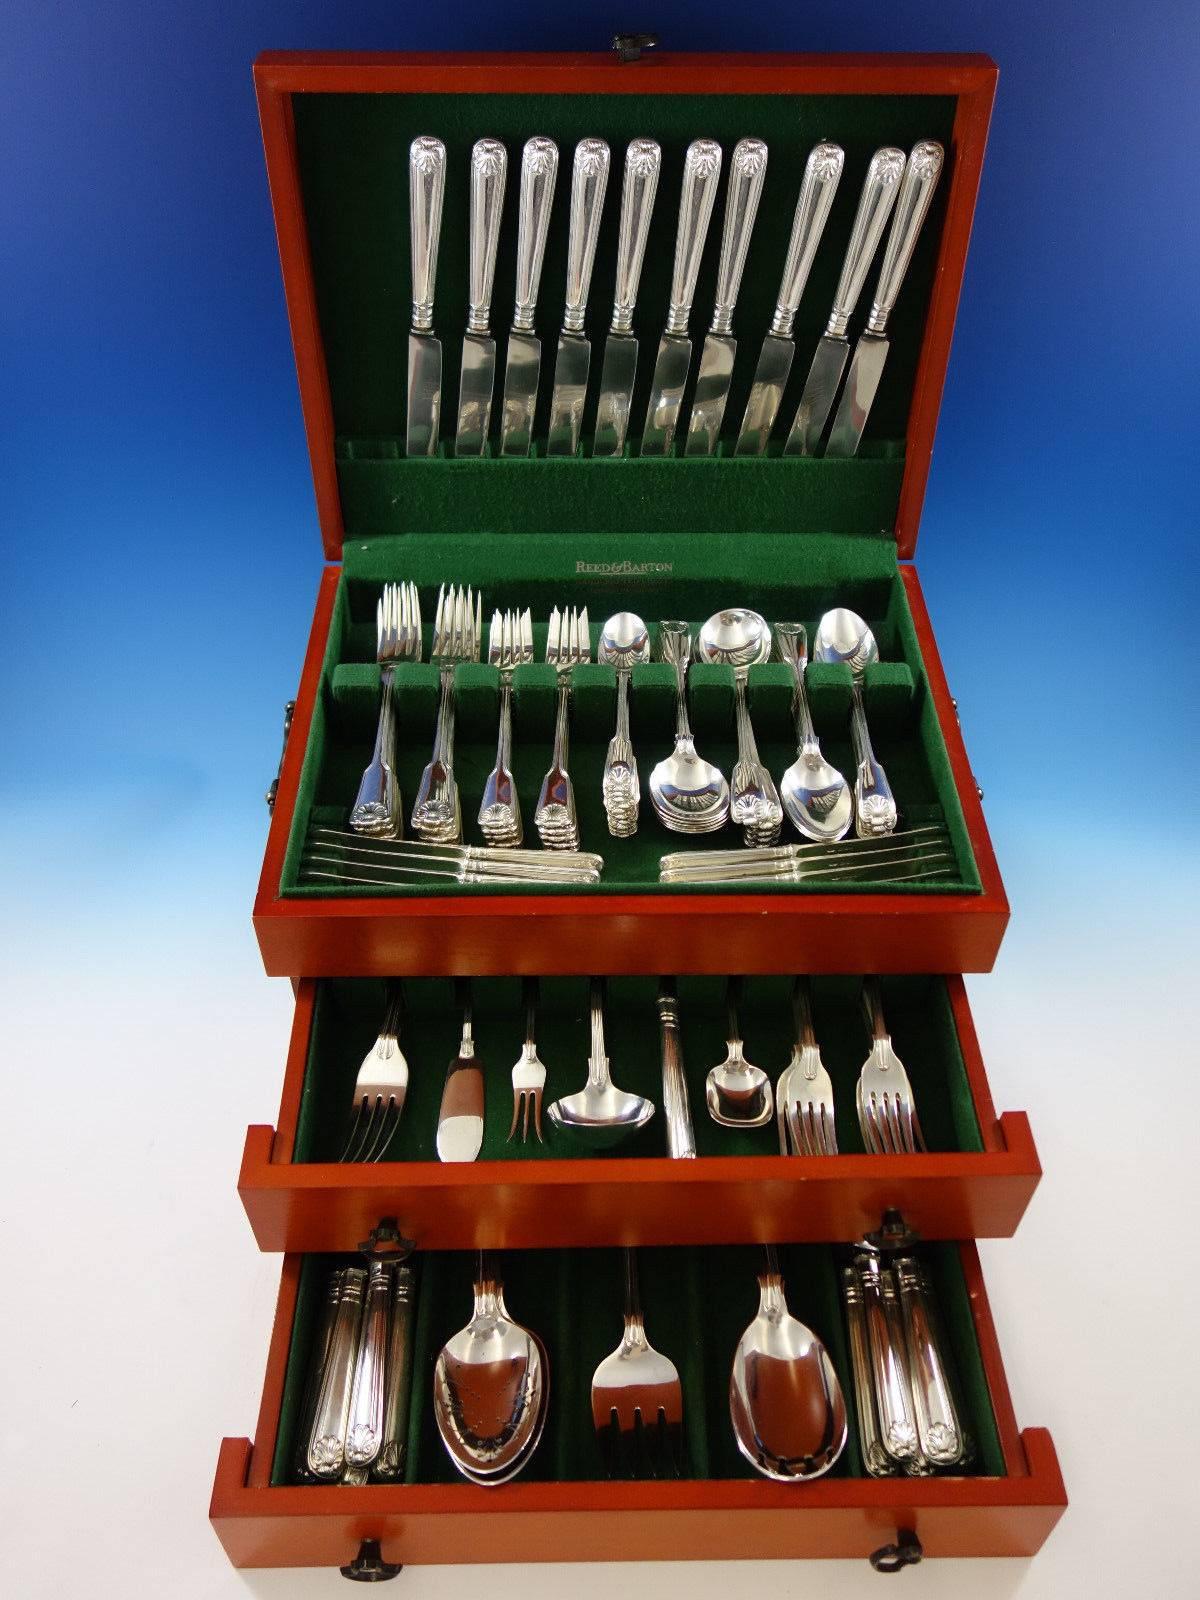 Monumental Fiddle Thread & Shell by James Robinson handmade sterling silver flatware set of 100 pieces. This set includes:

Ten dinner size knives, 9 1/2"
Ten dinner size forks, 7 1/2"
Ten luncheon forks, 7"
Ten salad forks, 6